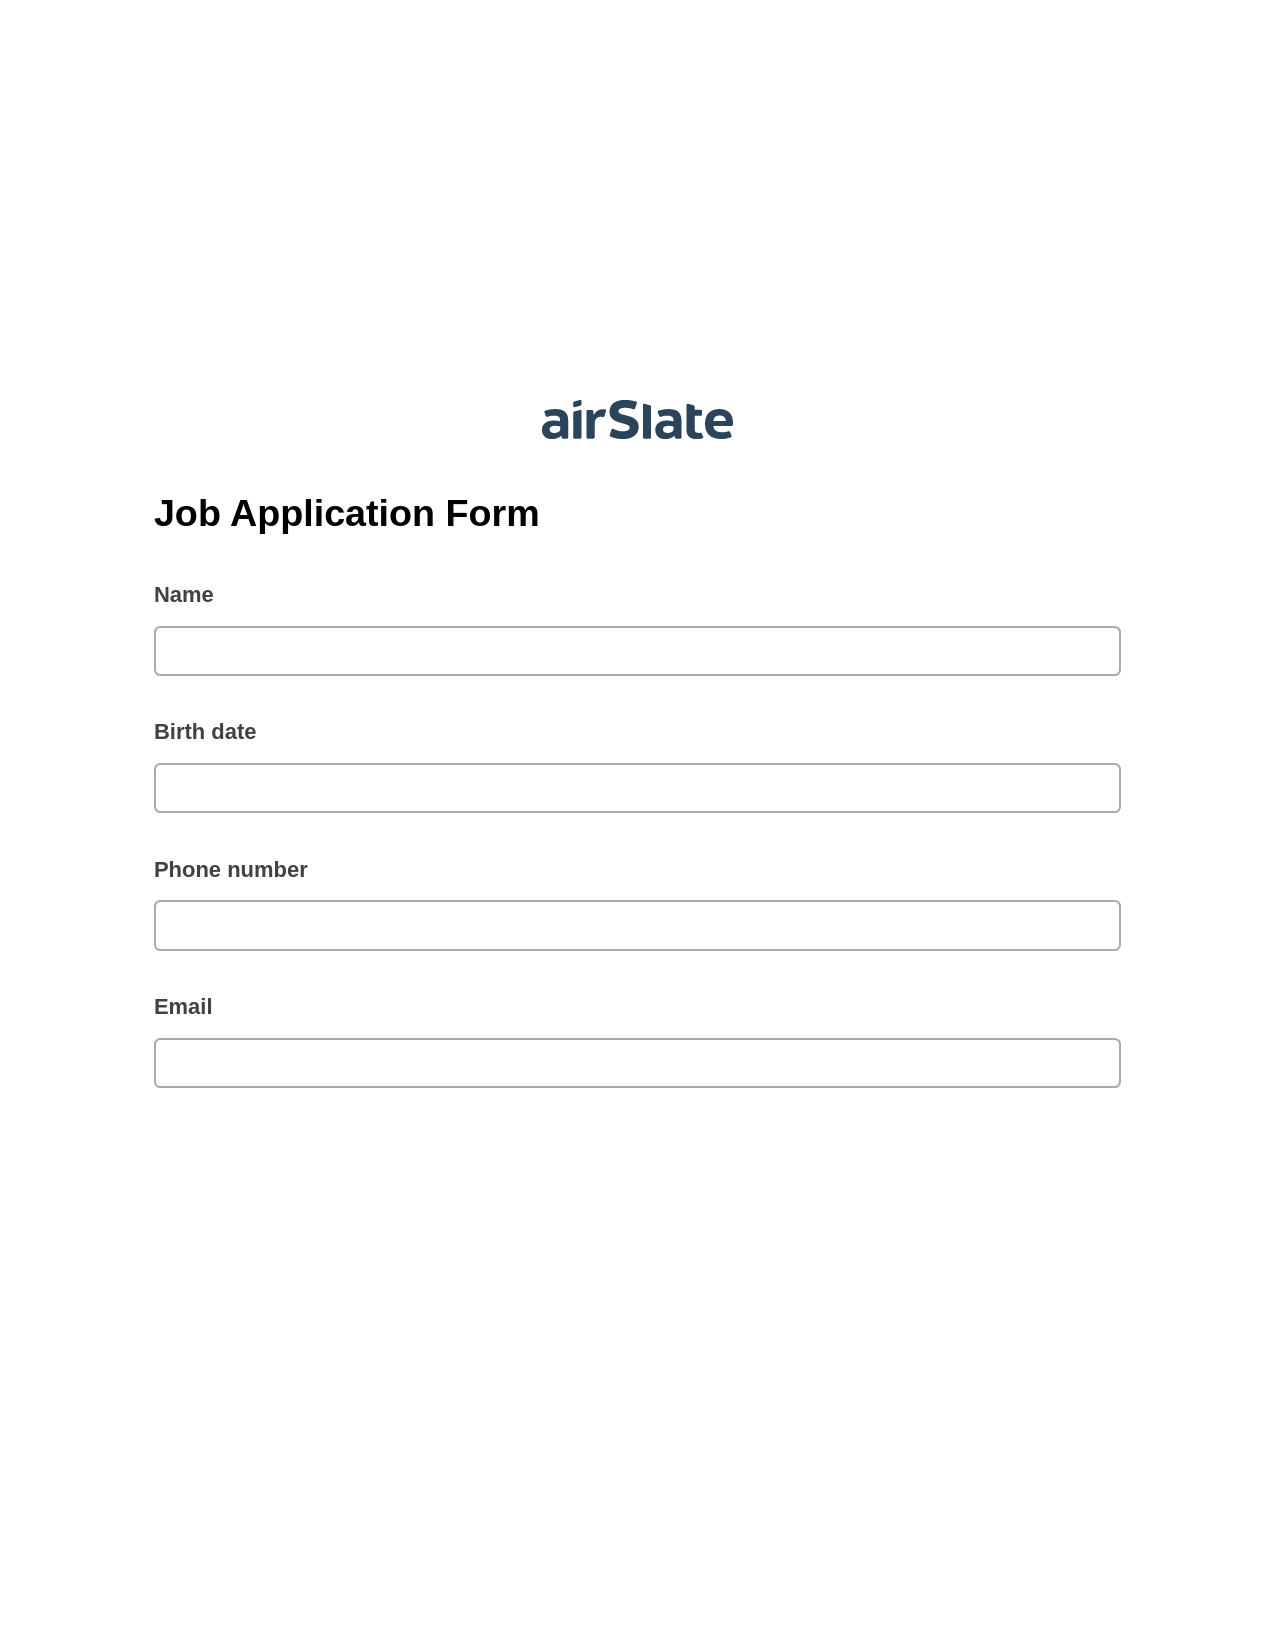 Multirole Job Application Form Pre-fill from Google Sheet Dropdown Options Bot, Create MS Dynamics 365 Records Bot, Export to Excel 365 Bot